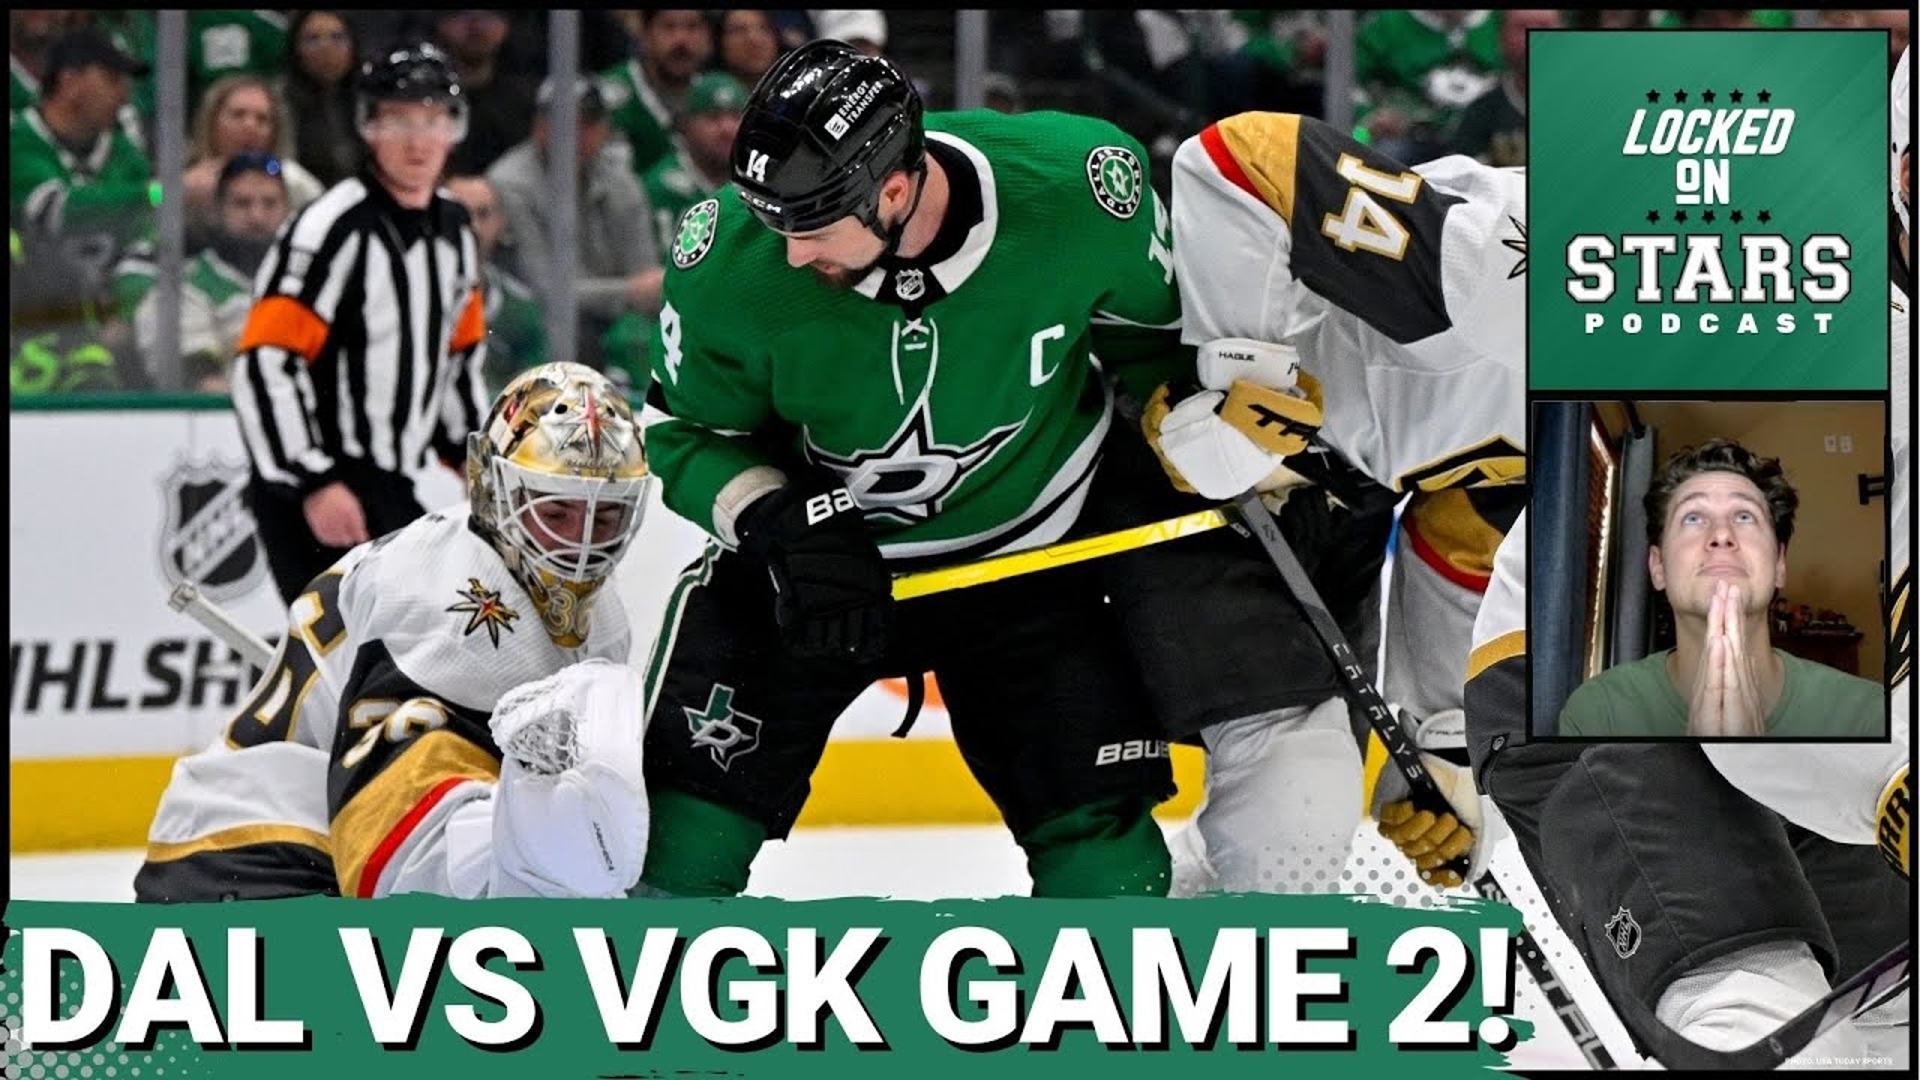 On today's episode of Locked On Stars, Joey relays his thoughts and opinions after rewatching the Dallas Stars 4-3 loss to the Vegas Golden Knights in game one.